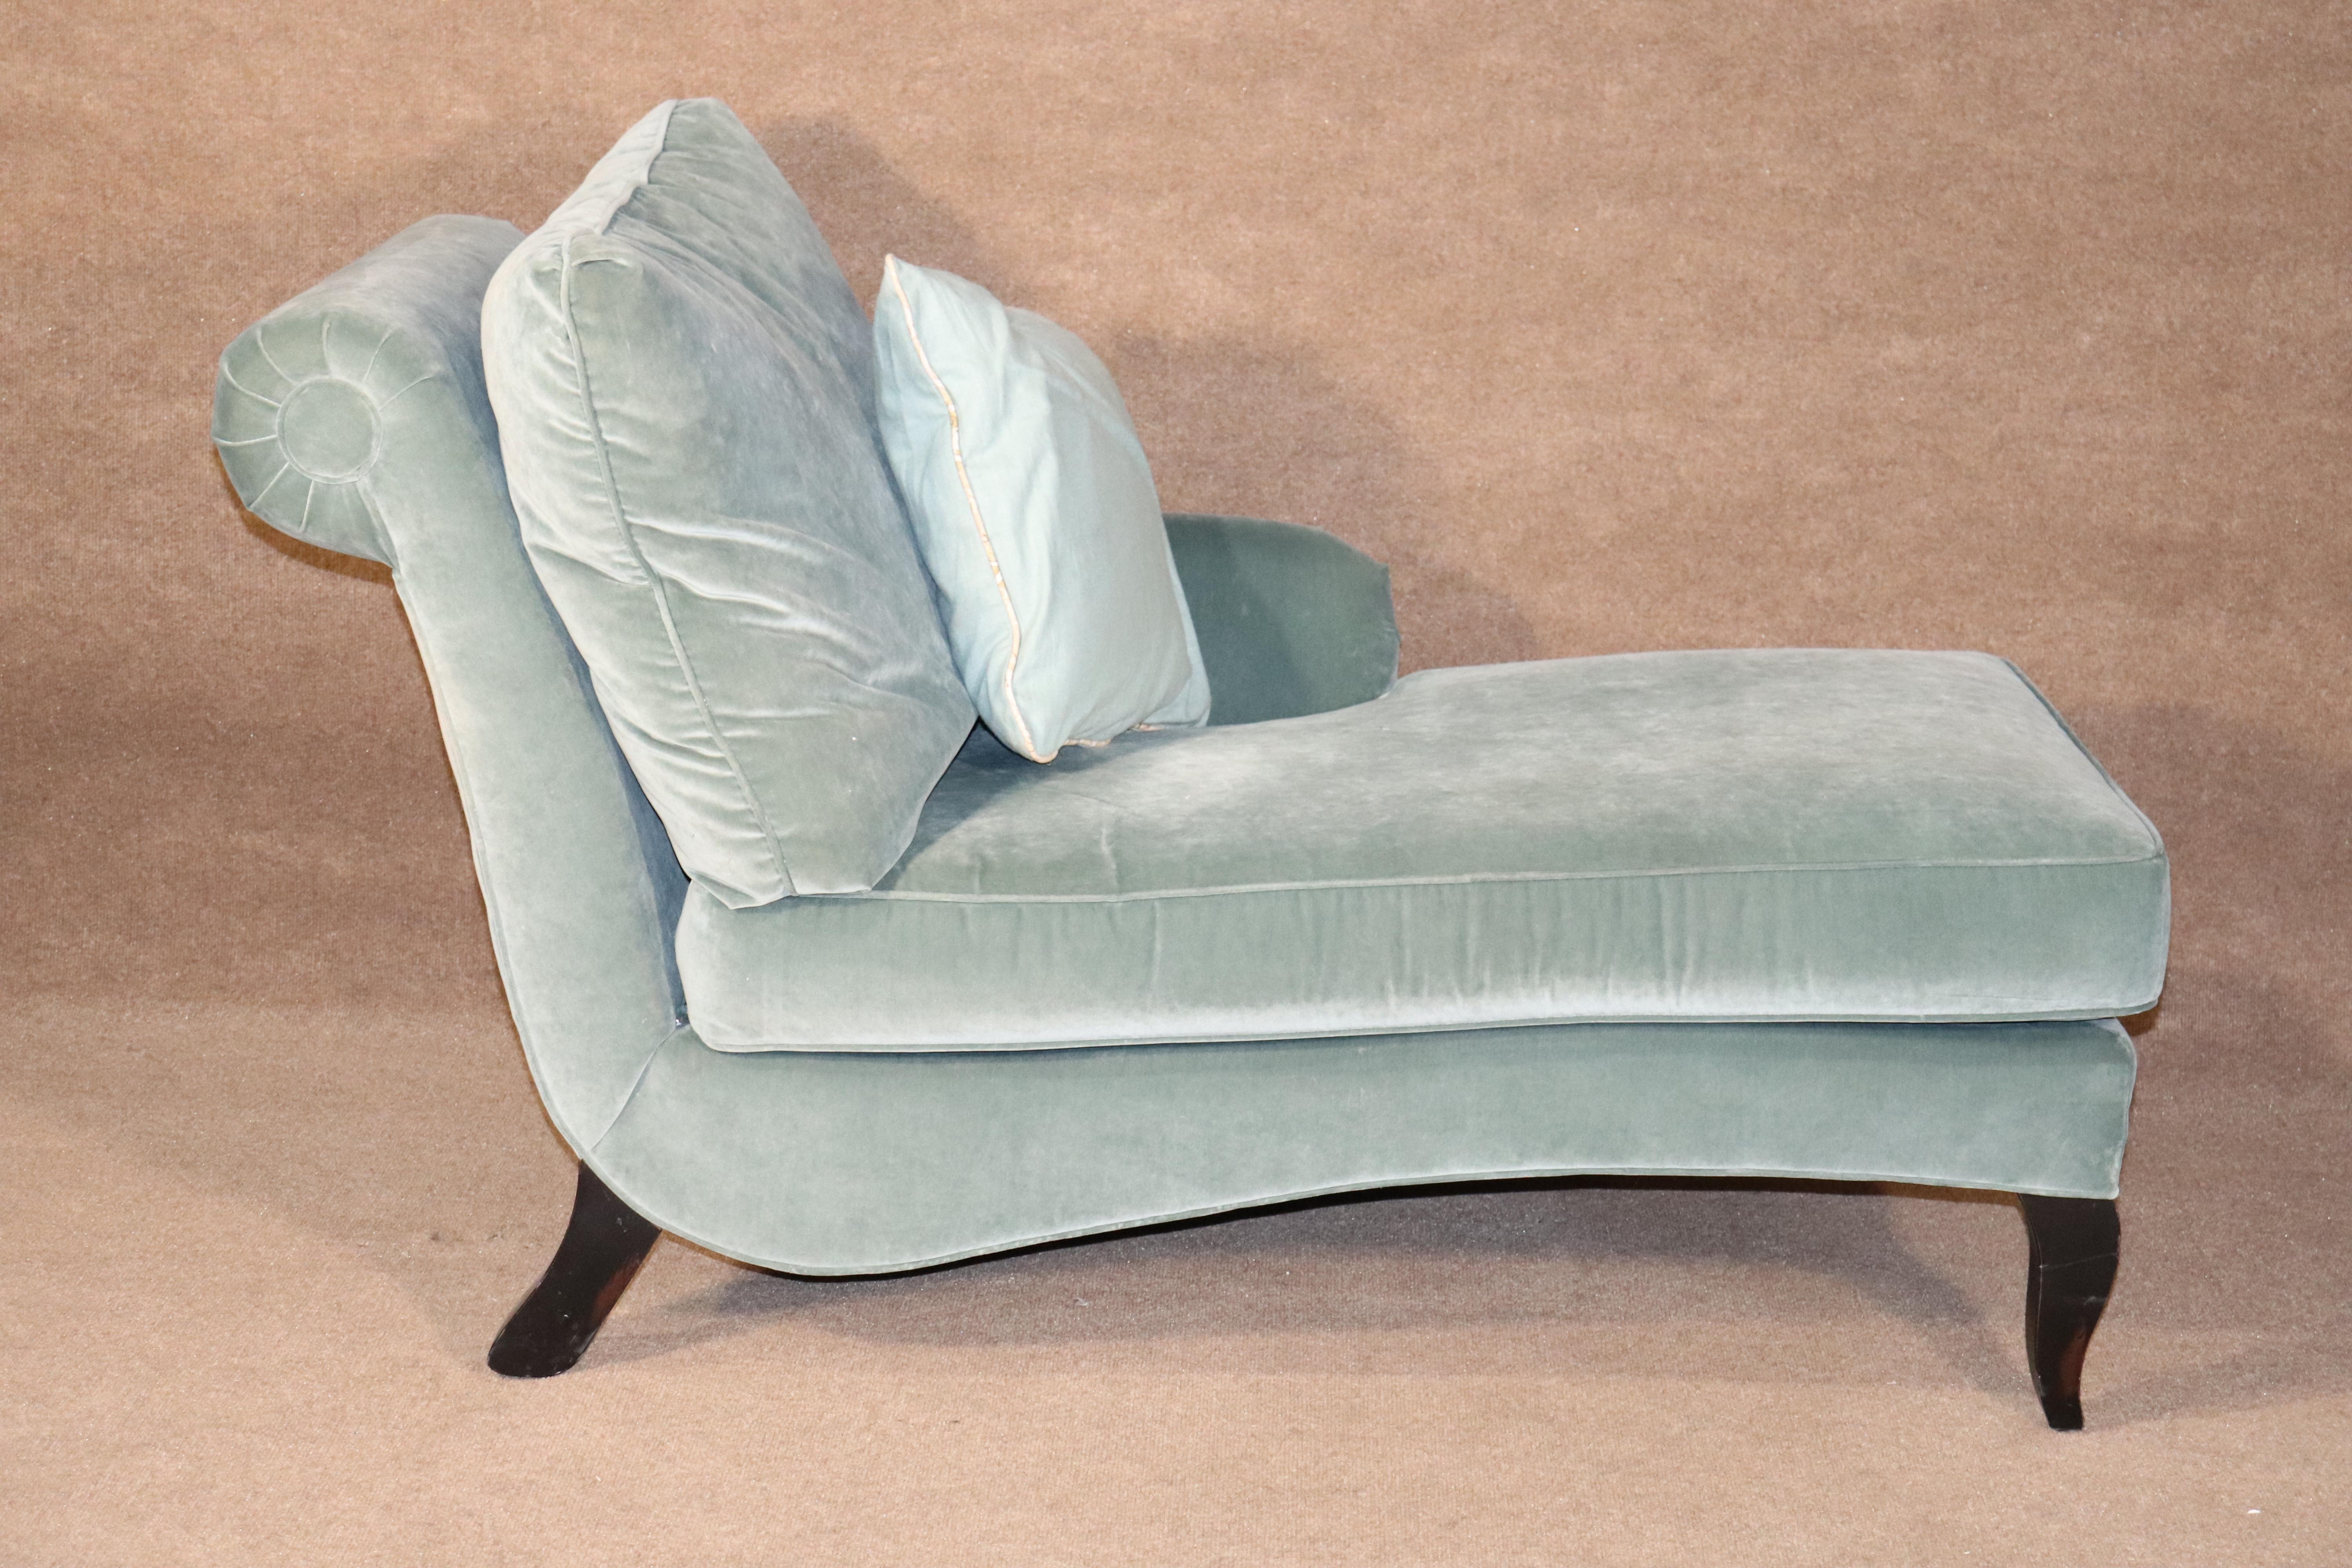 Vintage fainting couch in rich velvet. Features rolling arm on one side and wood legs. Light aqua blue coloring.
Please confirm location.